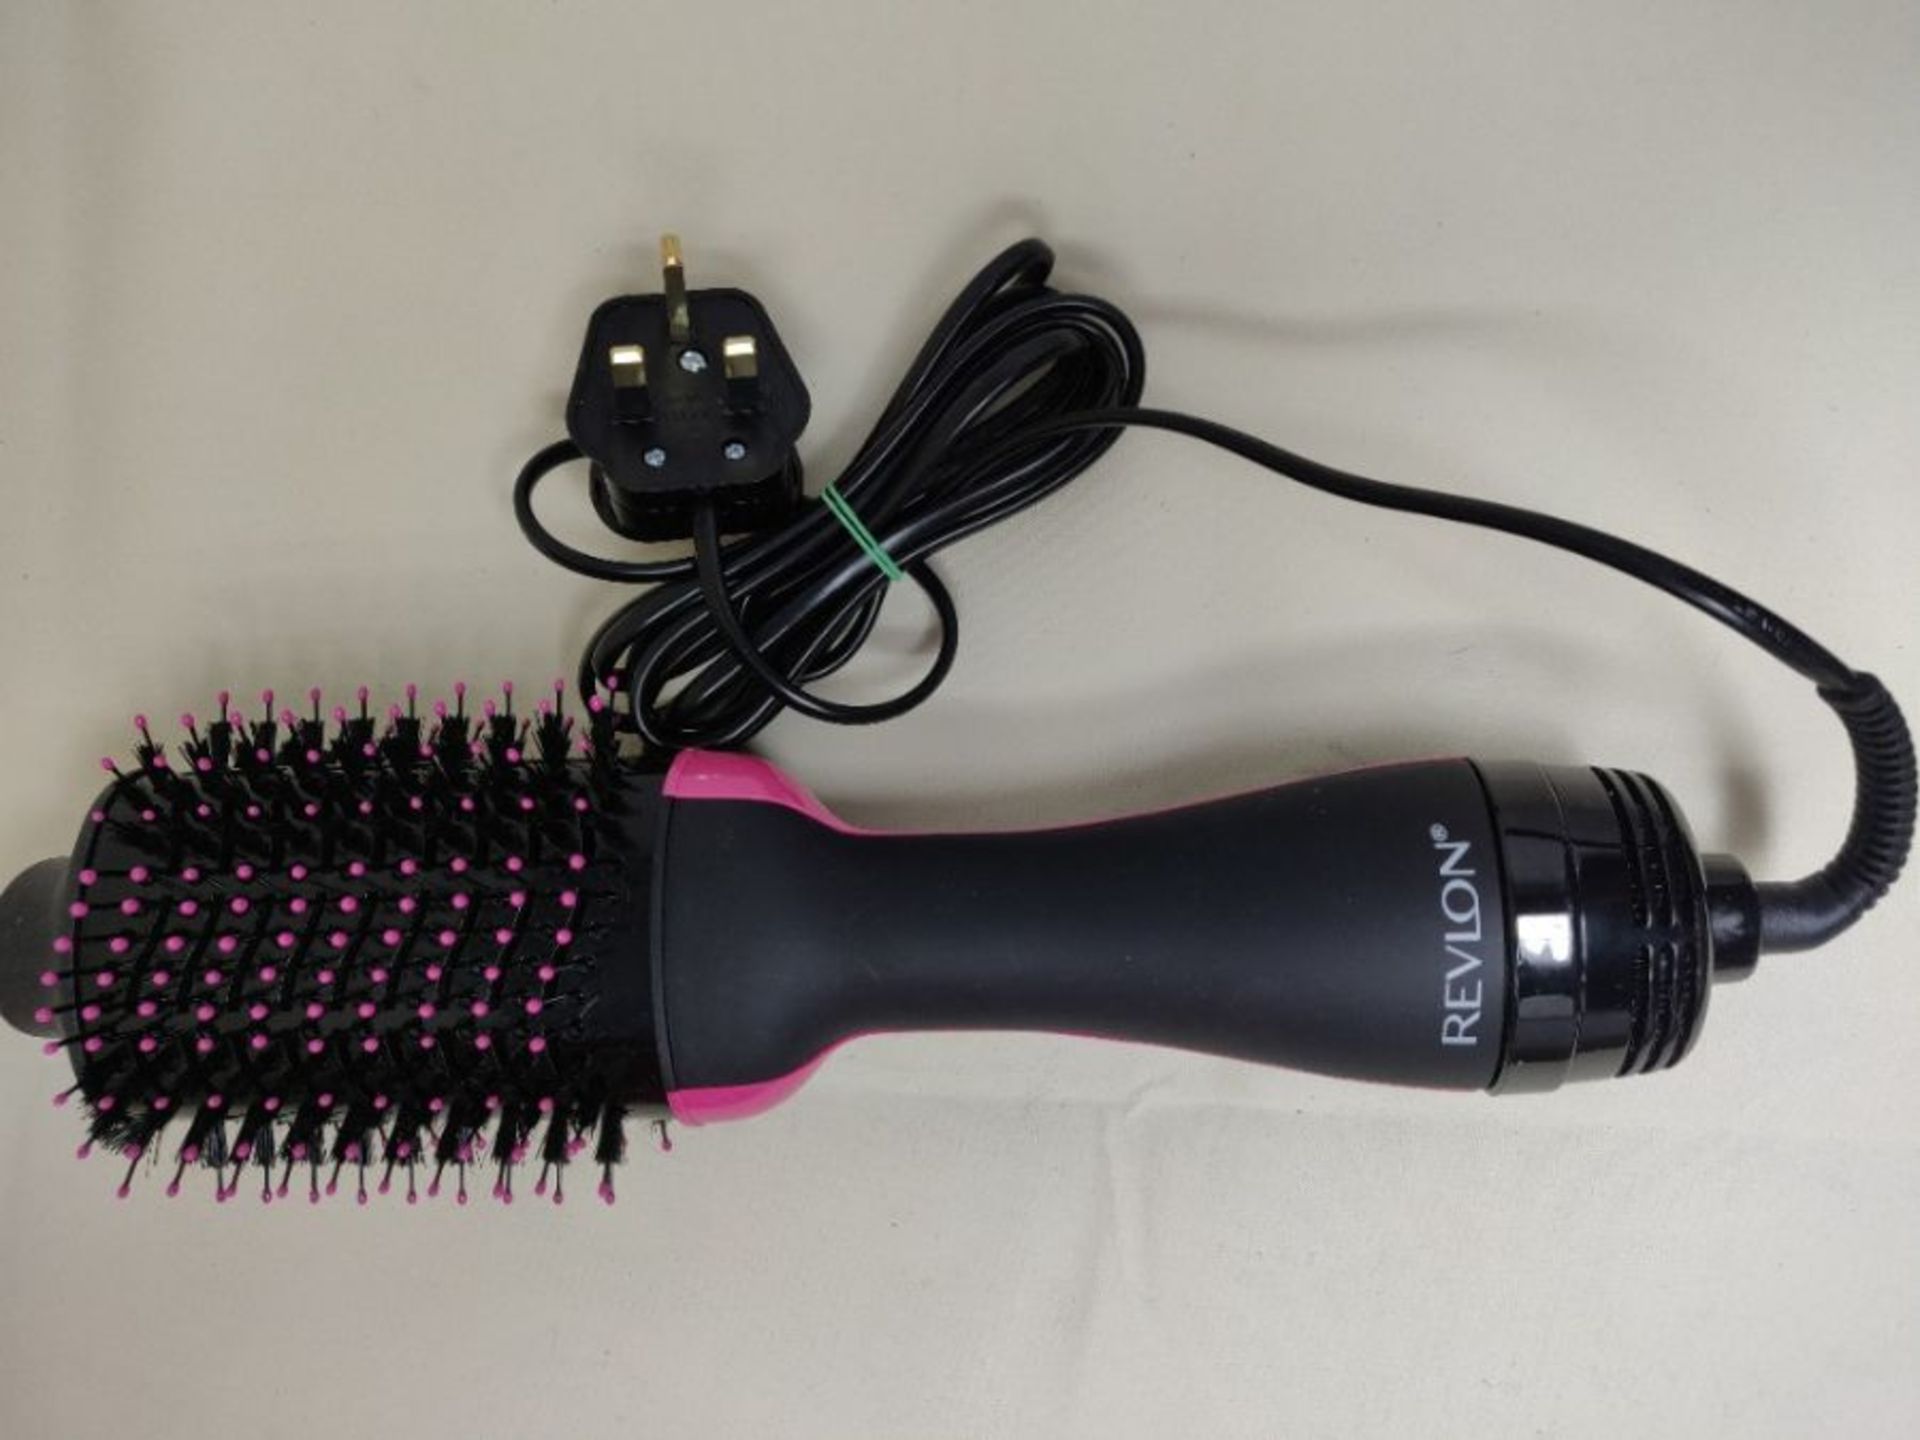 Revlon Salon One- Step Volumizer for mid to long hair (2-in-1 styling tool, dryer and - Image 3 of 3